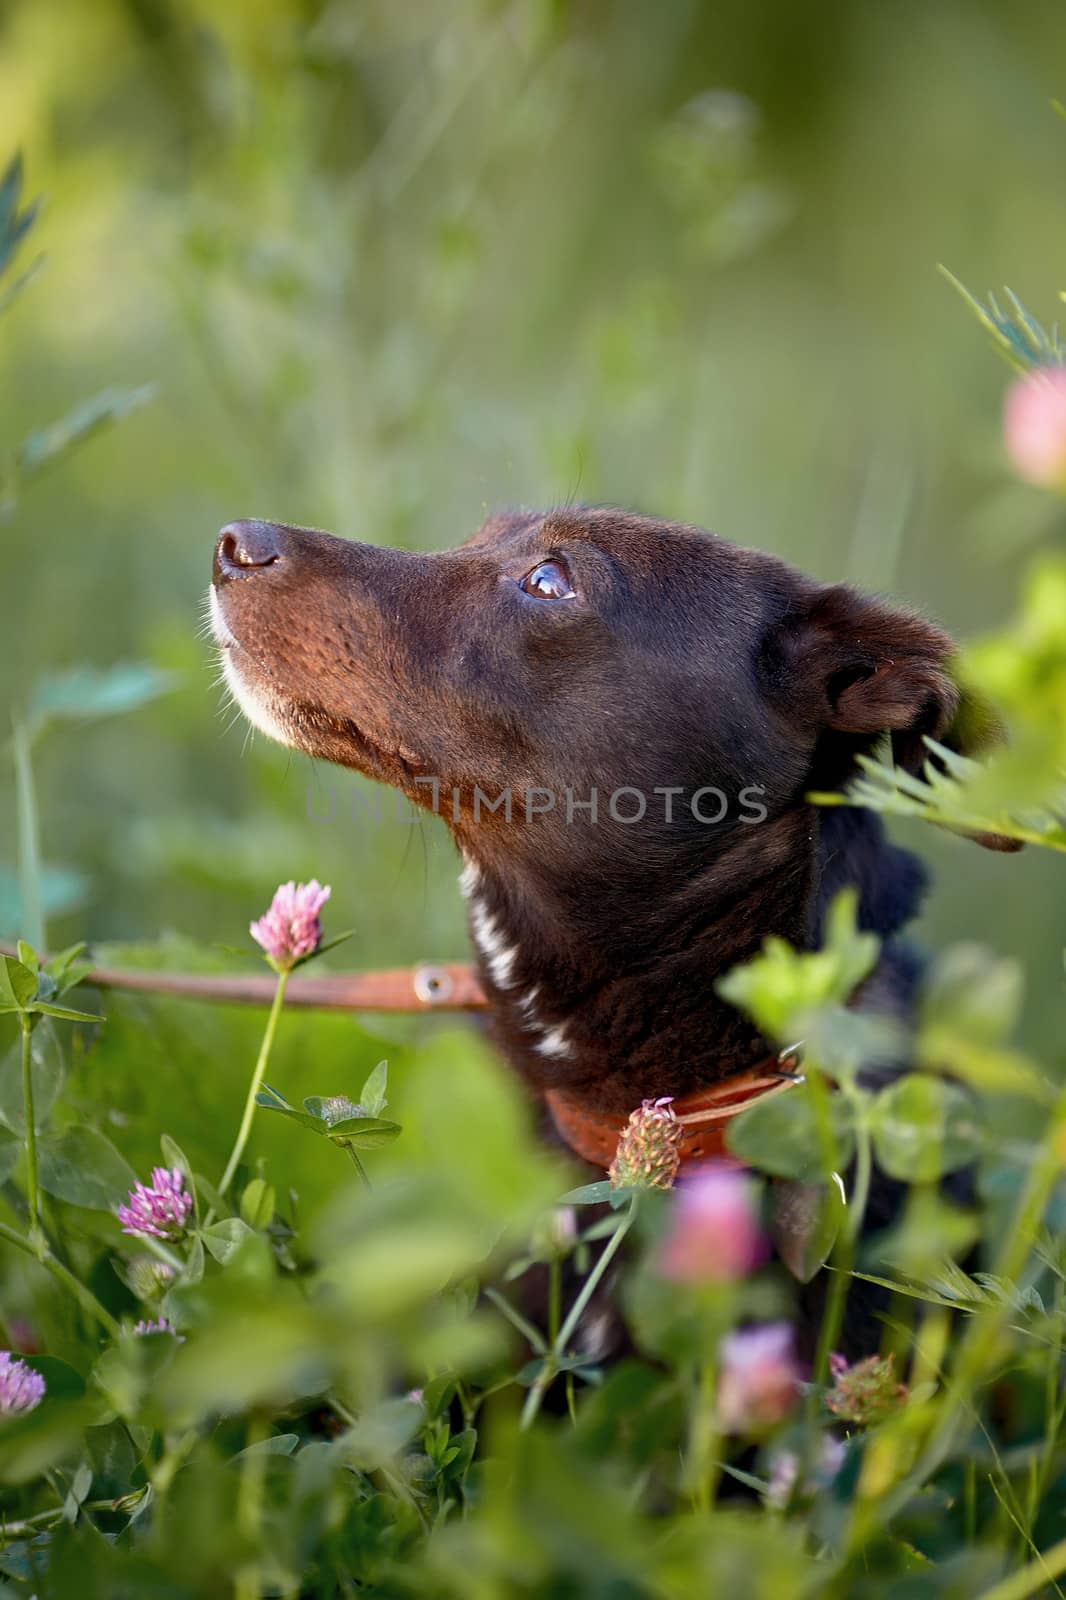 Portrait of a black doggie in a clover. Small black doggie. Not purebred dog. Doggie on walk. The not purebred mongrel.